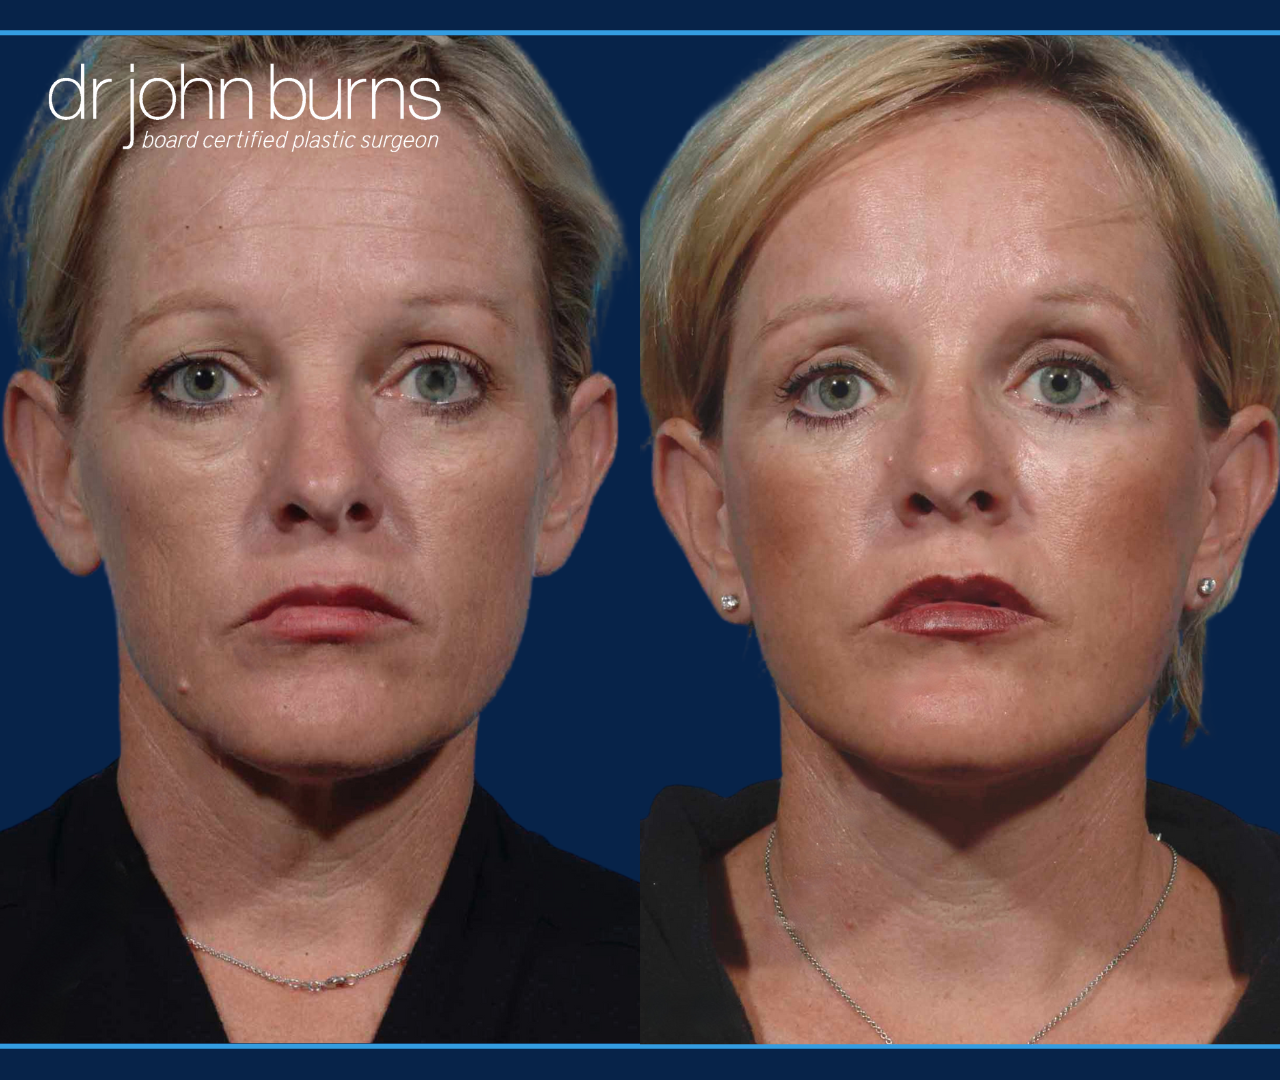 Before and After Mini Facelift- Dallas Facelift Surgeon, Dr. John Burns 